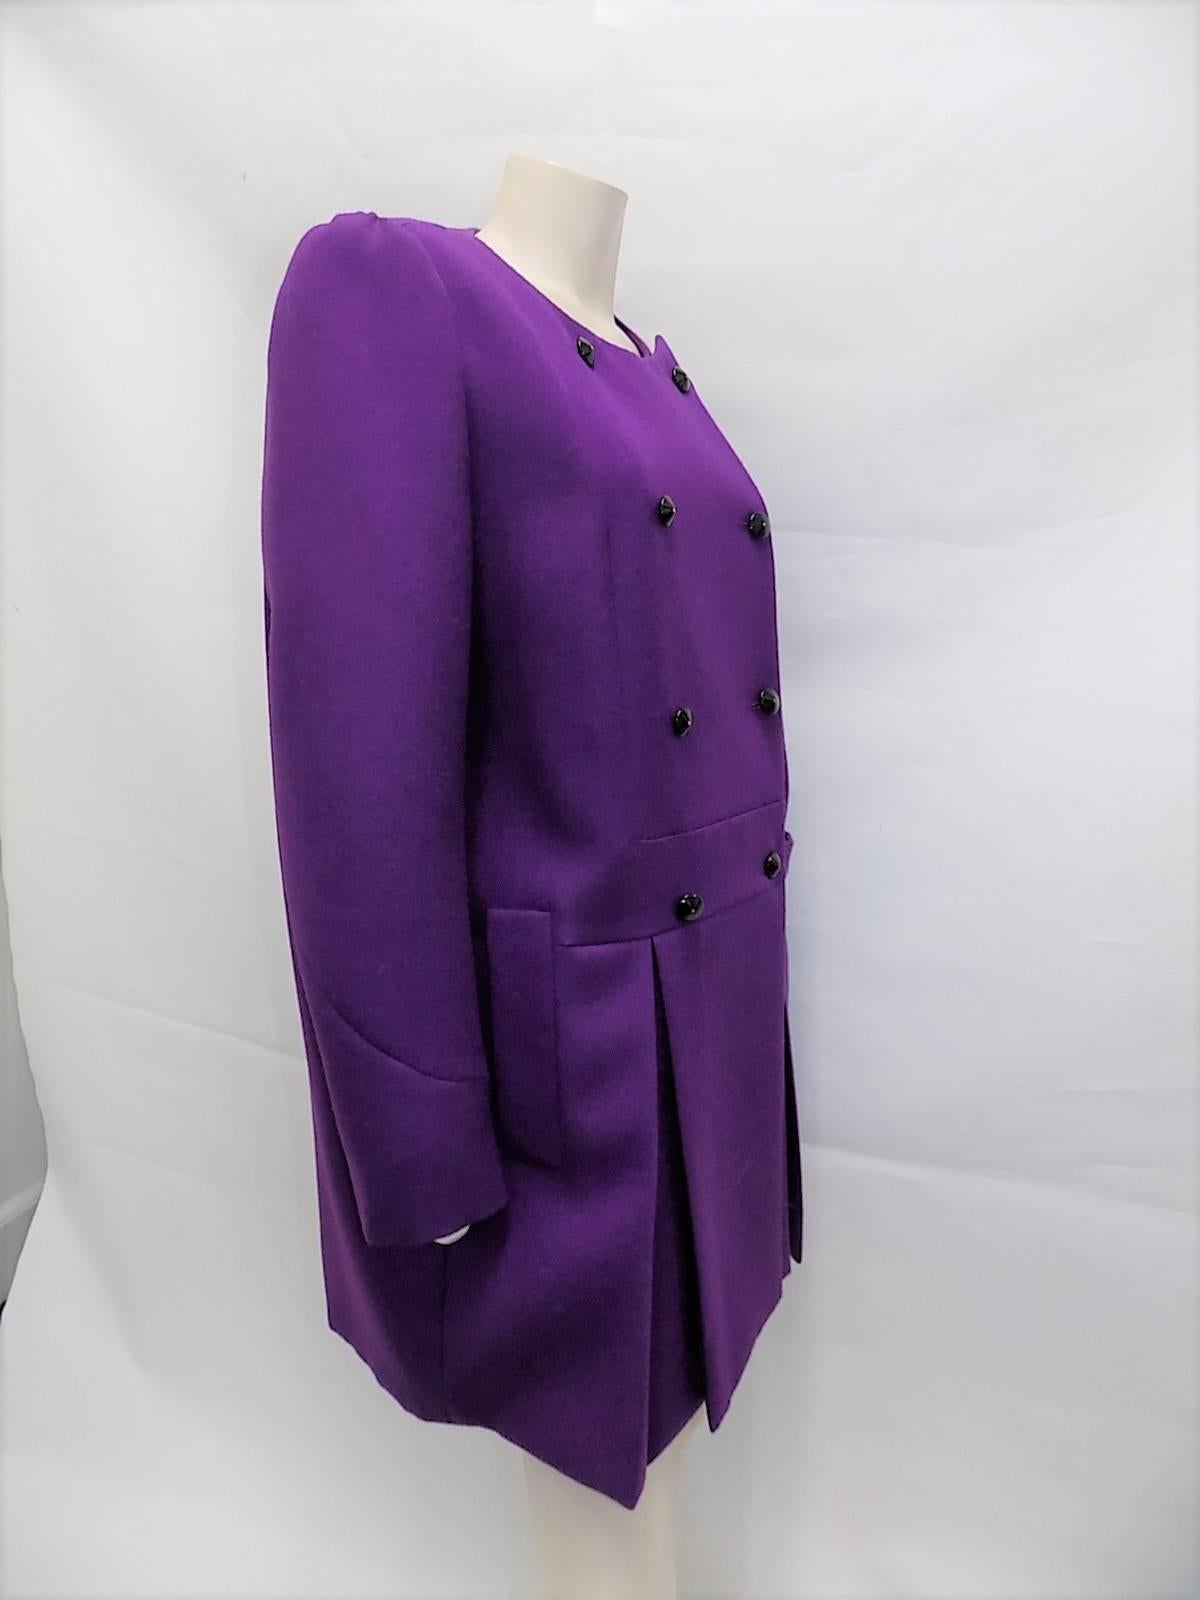 New With Tags Yves Saint Laurent Purple wool  Coat W Leather Buttons sz 46 3